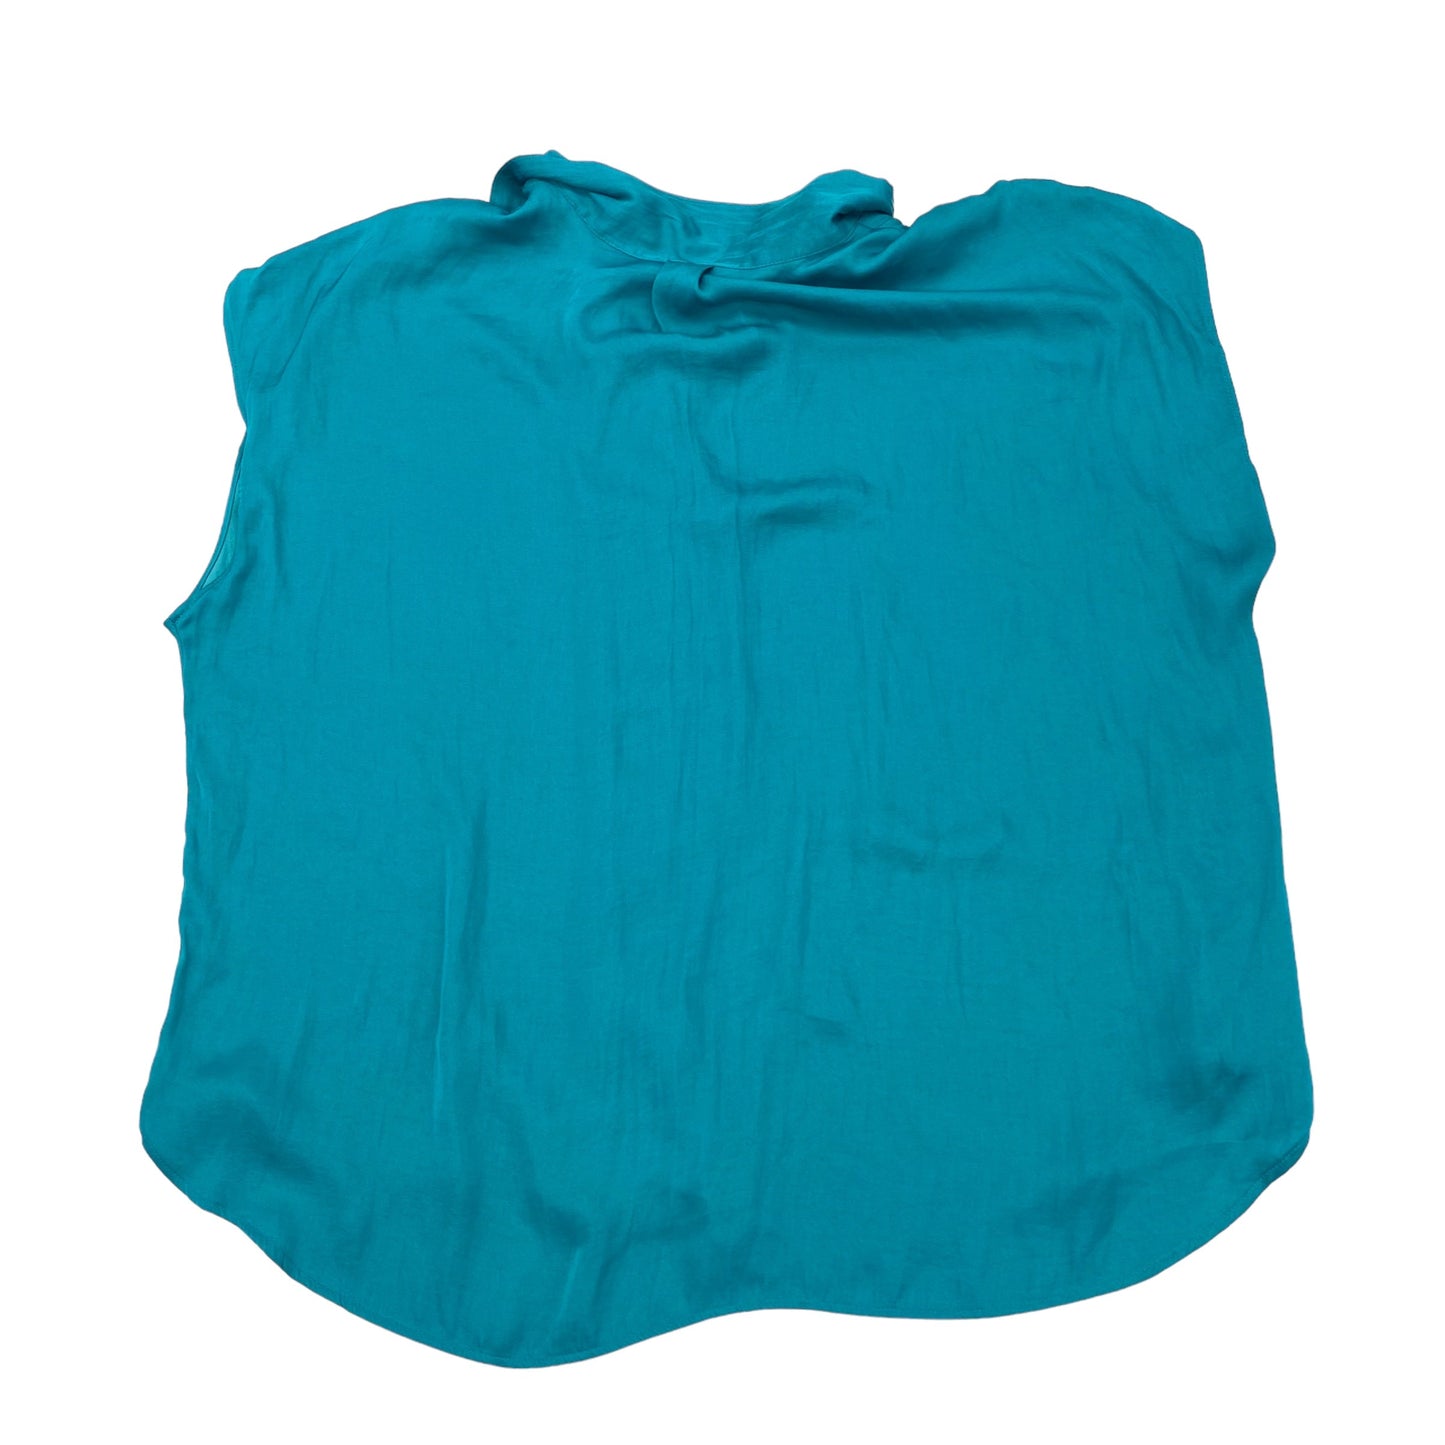 BLUE BLOUSE SLEEVELESS by NINE WEST APPAREL Size:2X